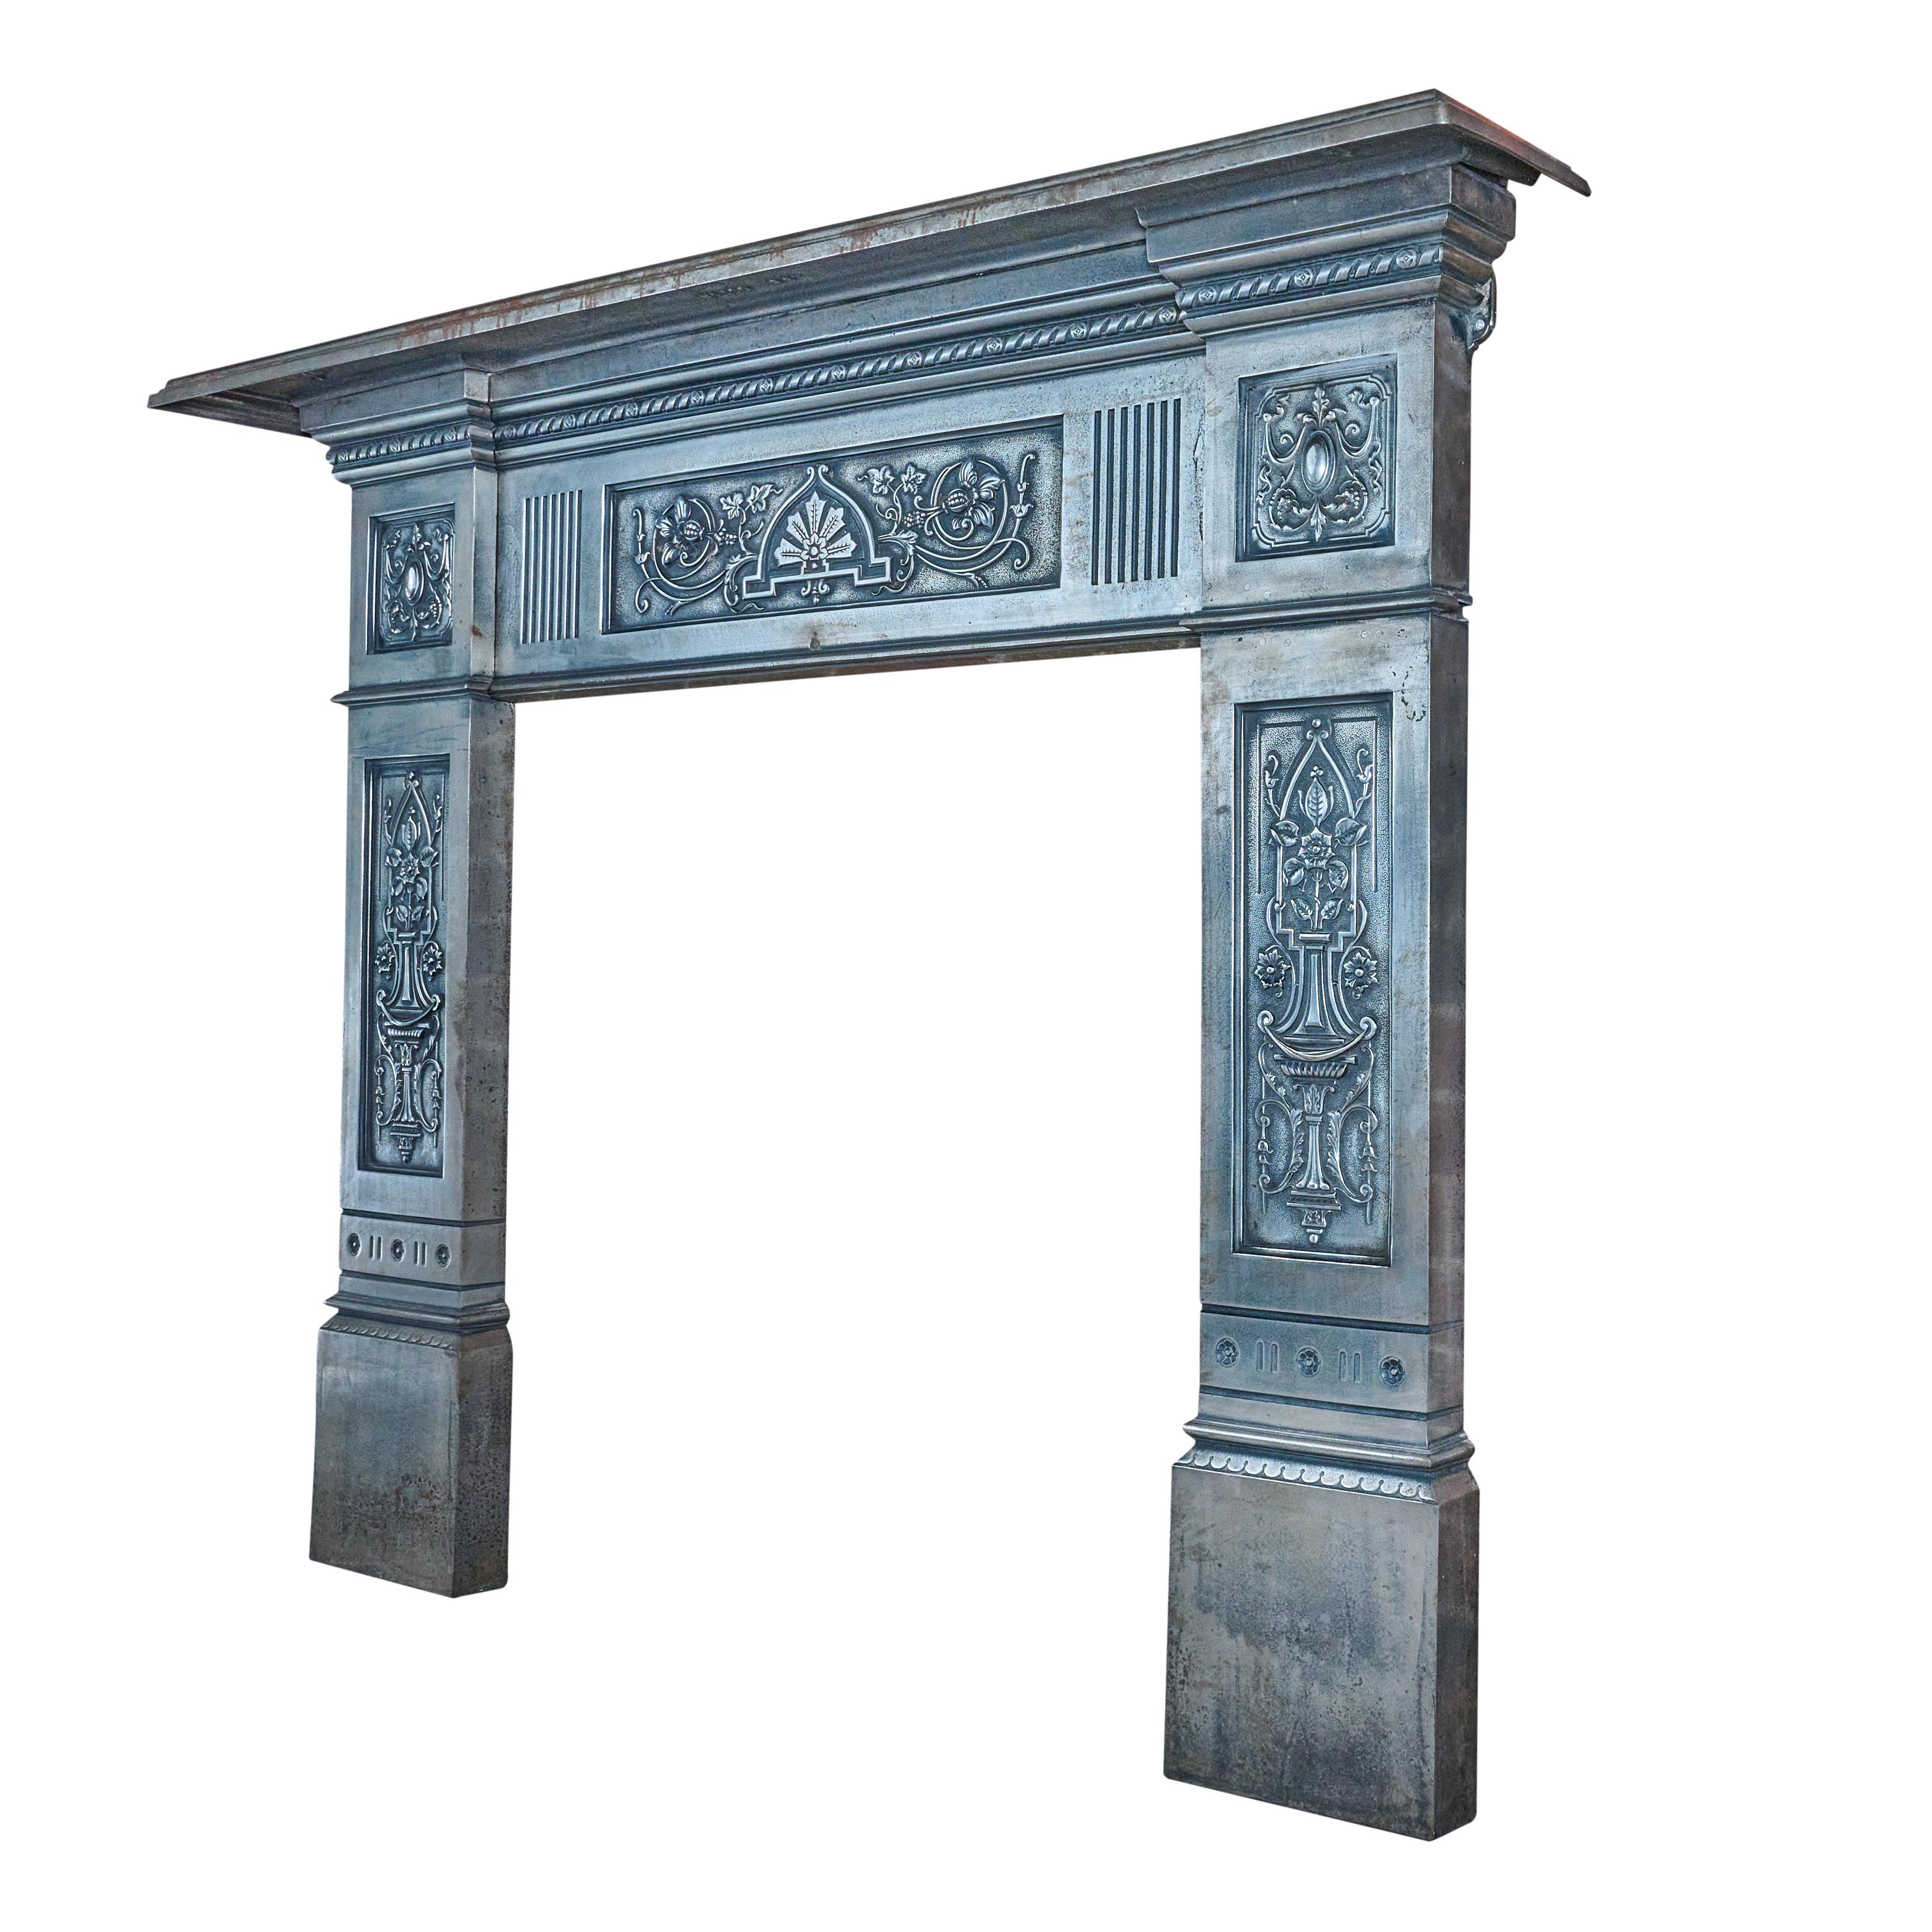 Polished cast iron fireplace surround. Great condition. Non-combustible and easily mounted.

